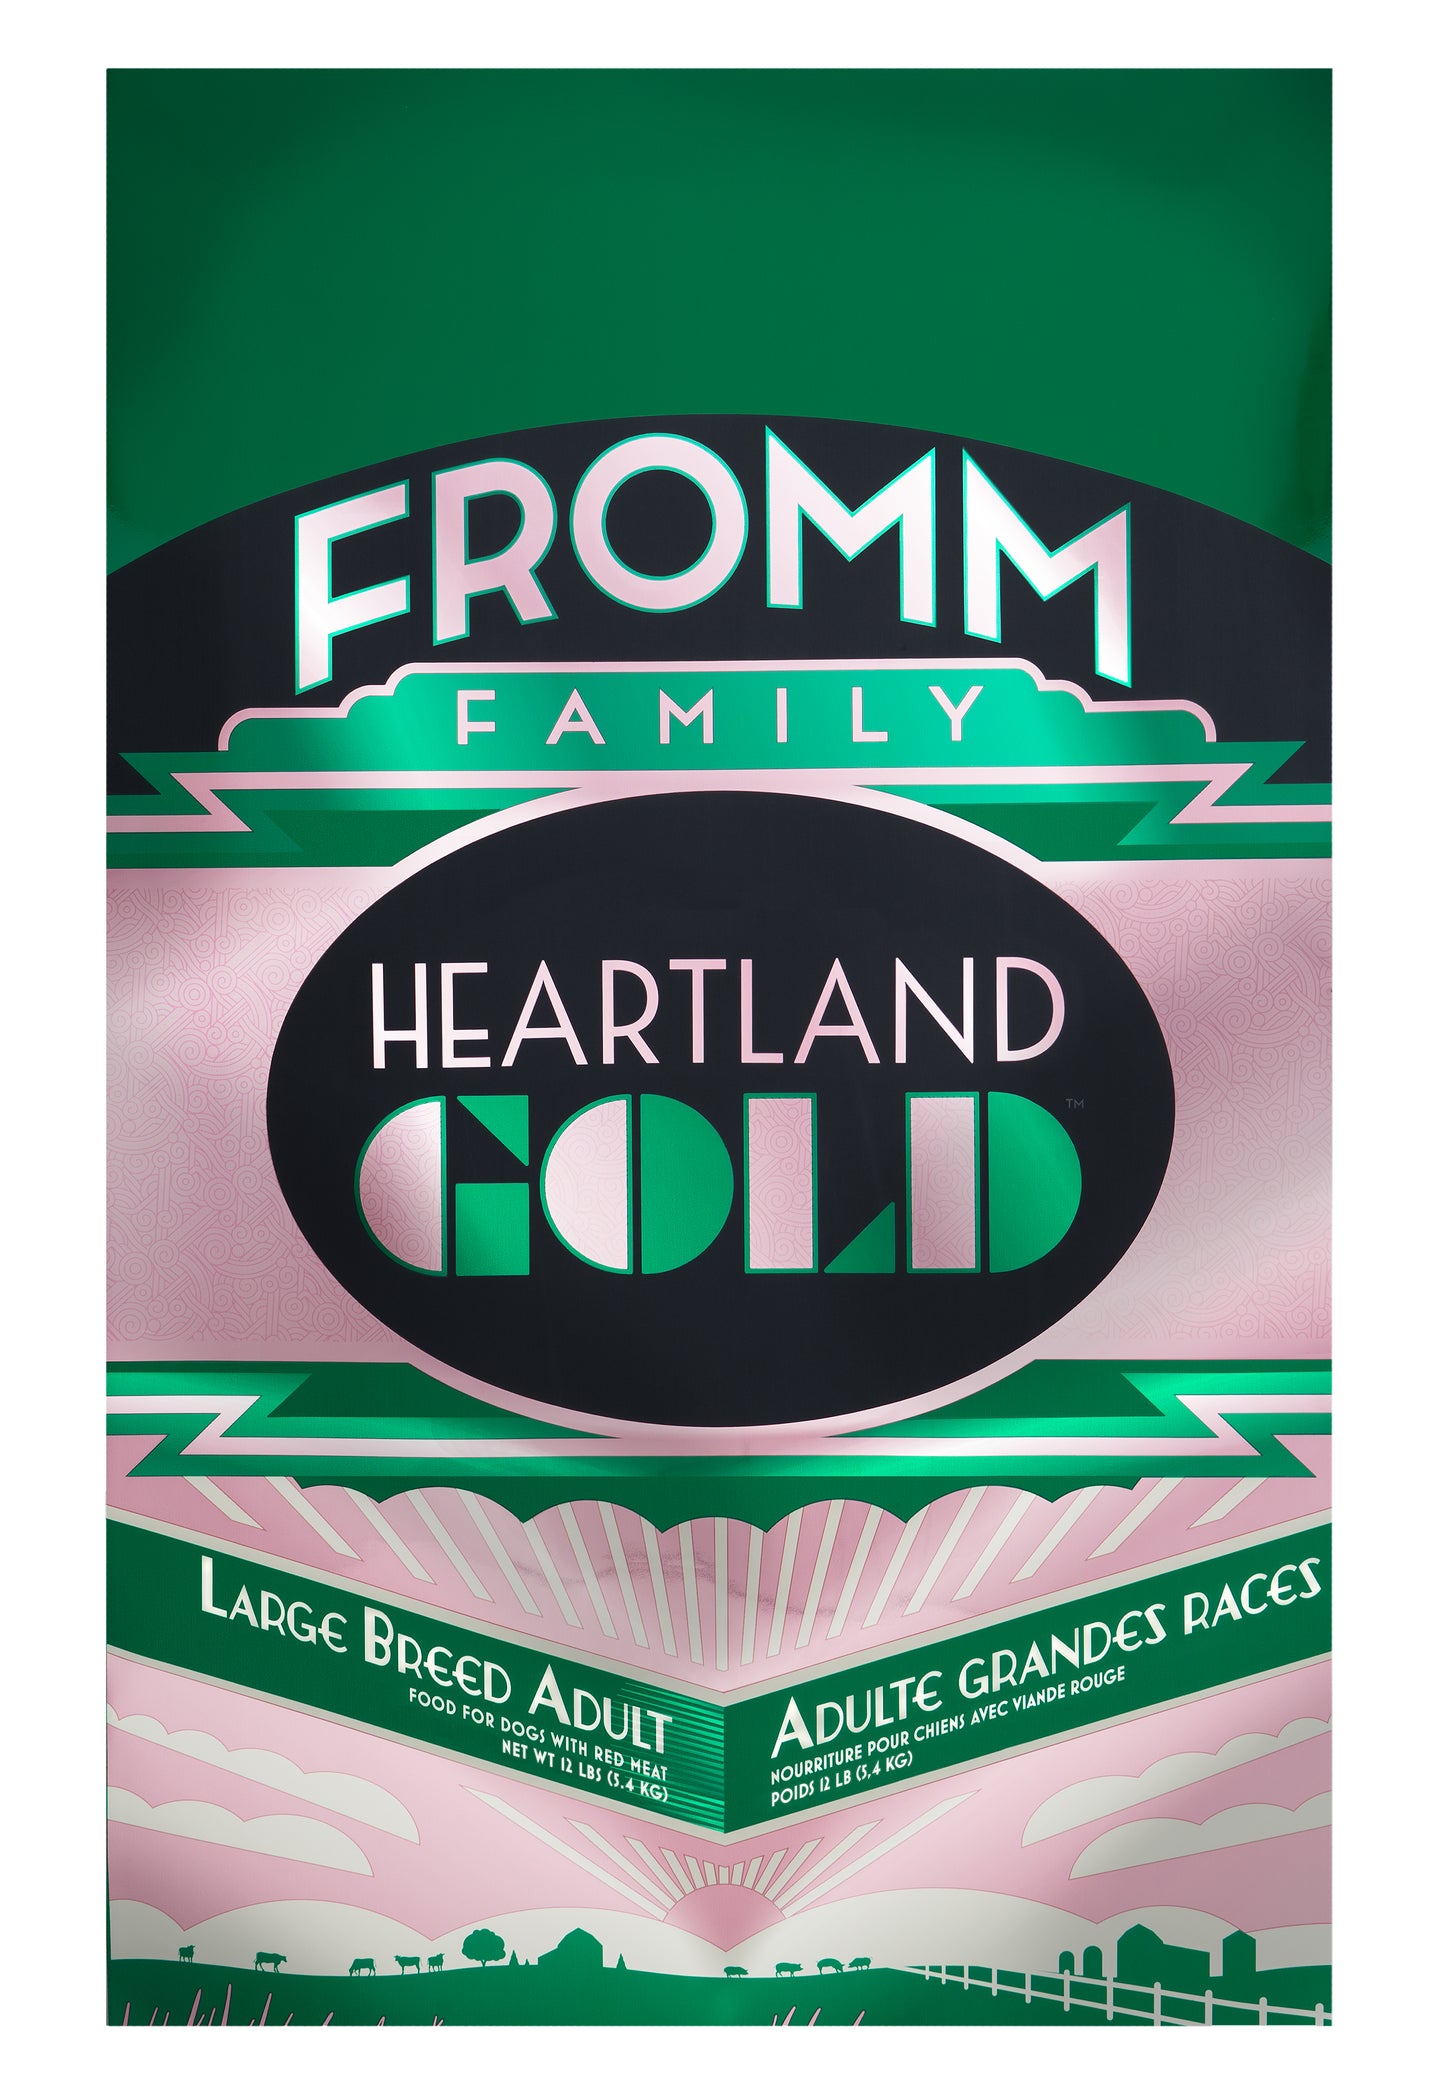 Fromm Heartland Gold Large Breed Adult Grain Free Dry Dog Food, 12lb Bag